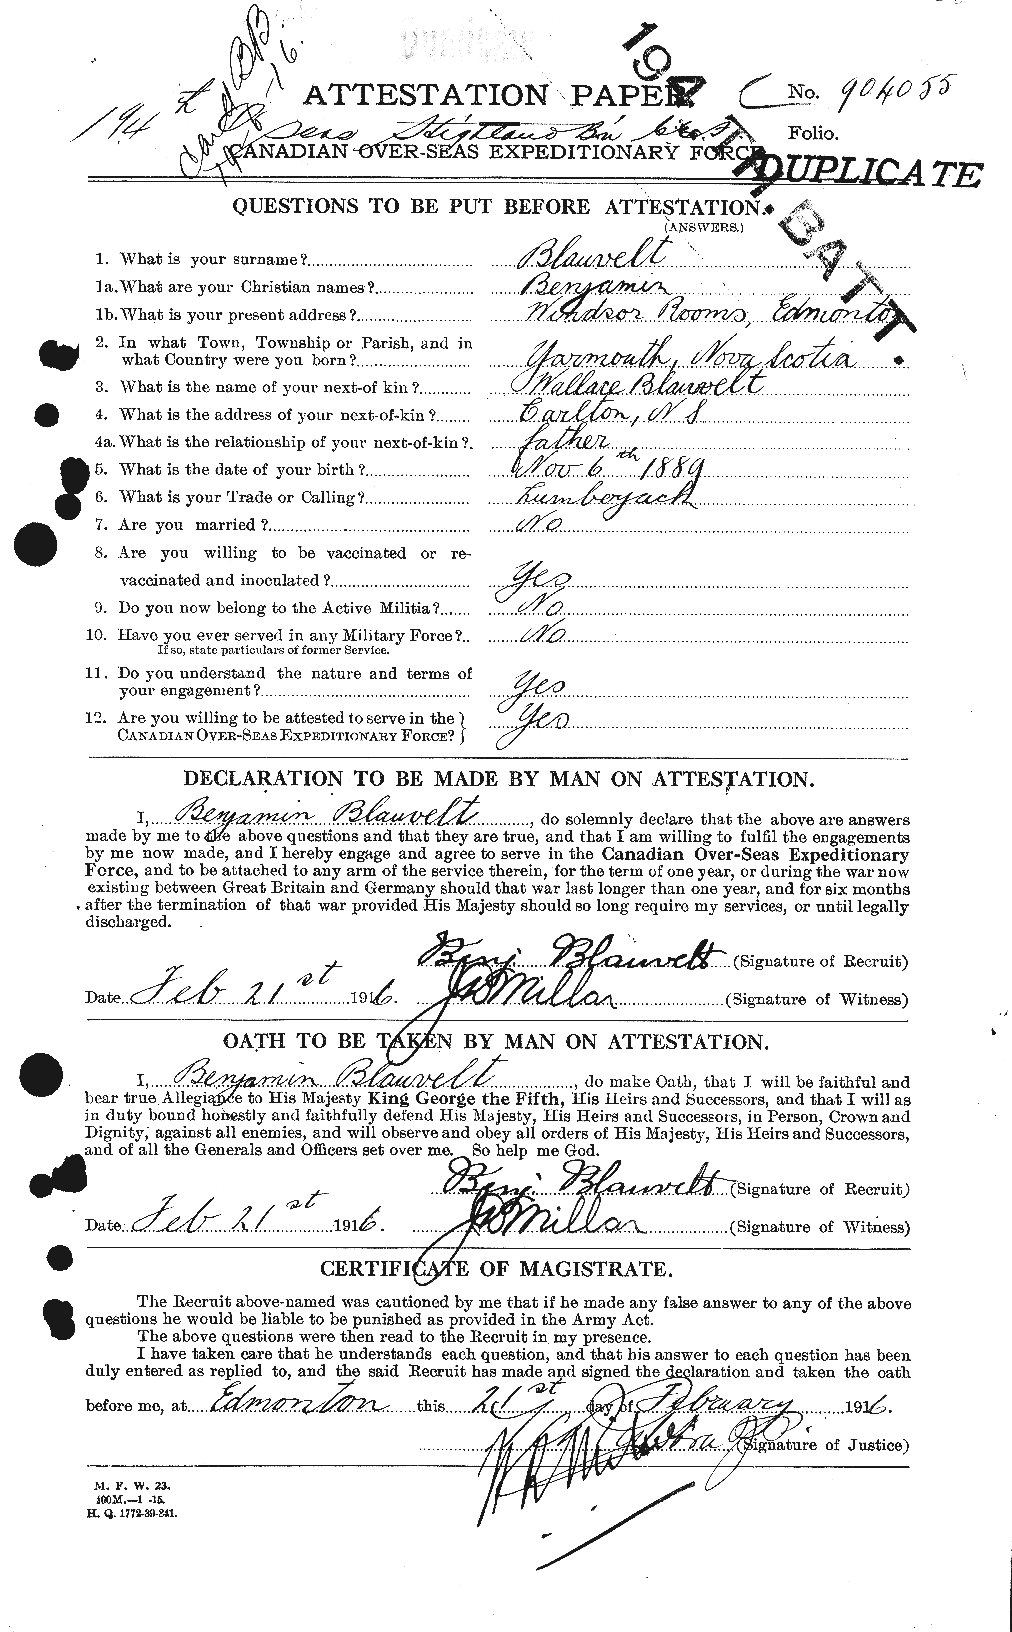 Personnel Records of the First World War - CEF 247829a